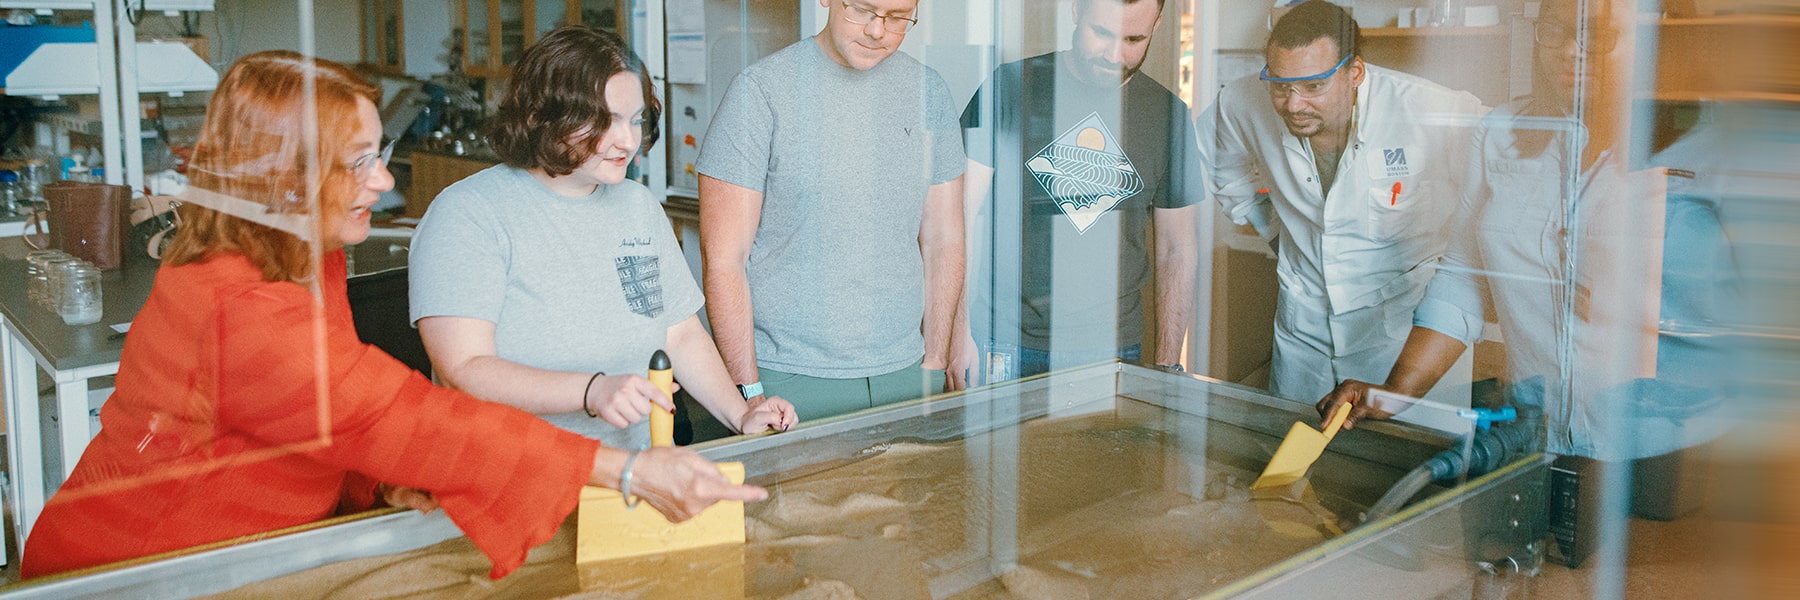 Students & faculty work at a water table in the lab.